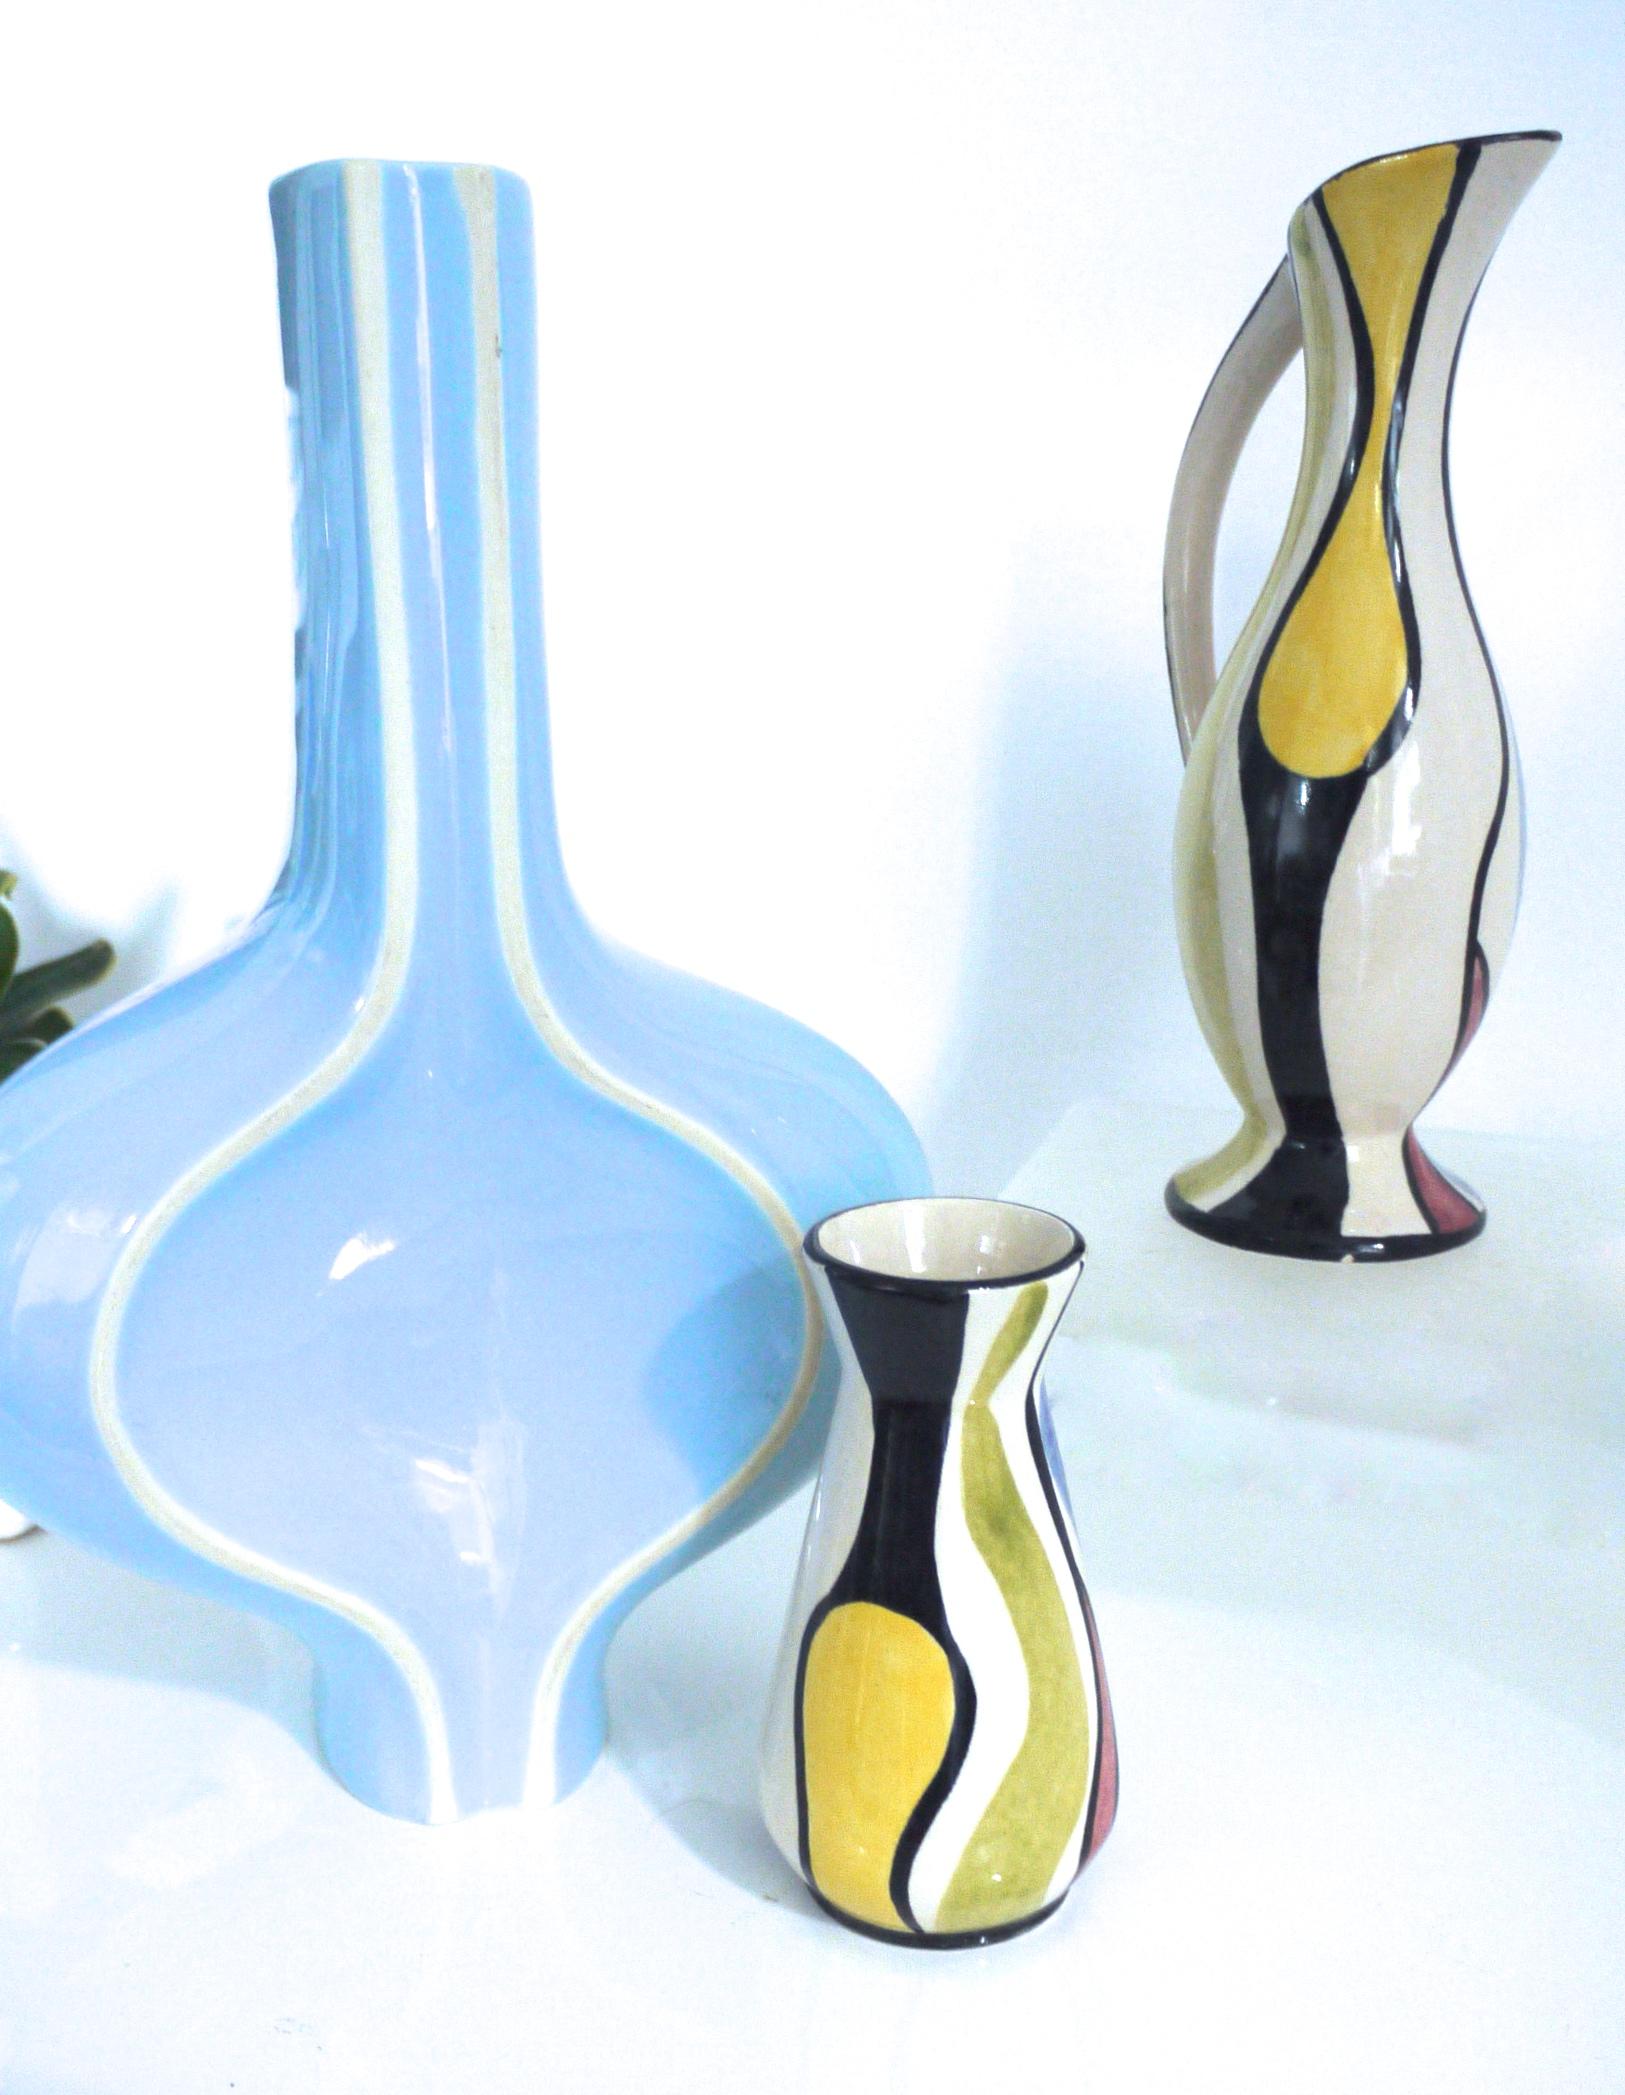 Ceramic Sought after, Space Age China Swallow Vase by Scabetti Dominic Bromley, 2002 UK For Sale